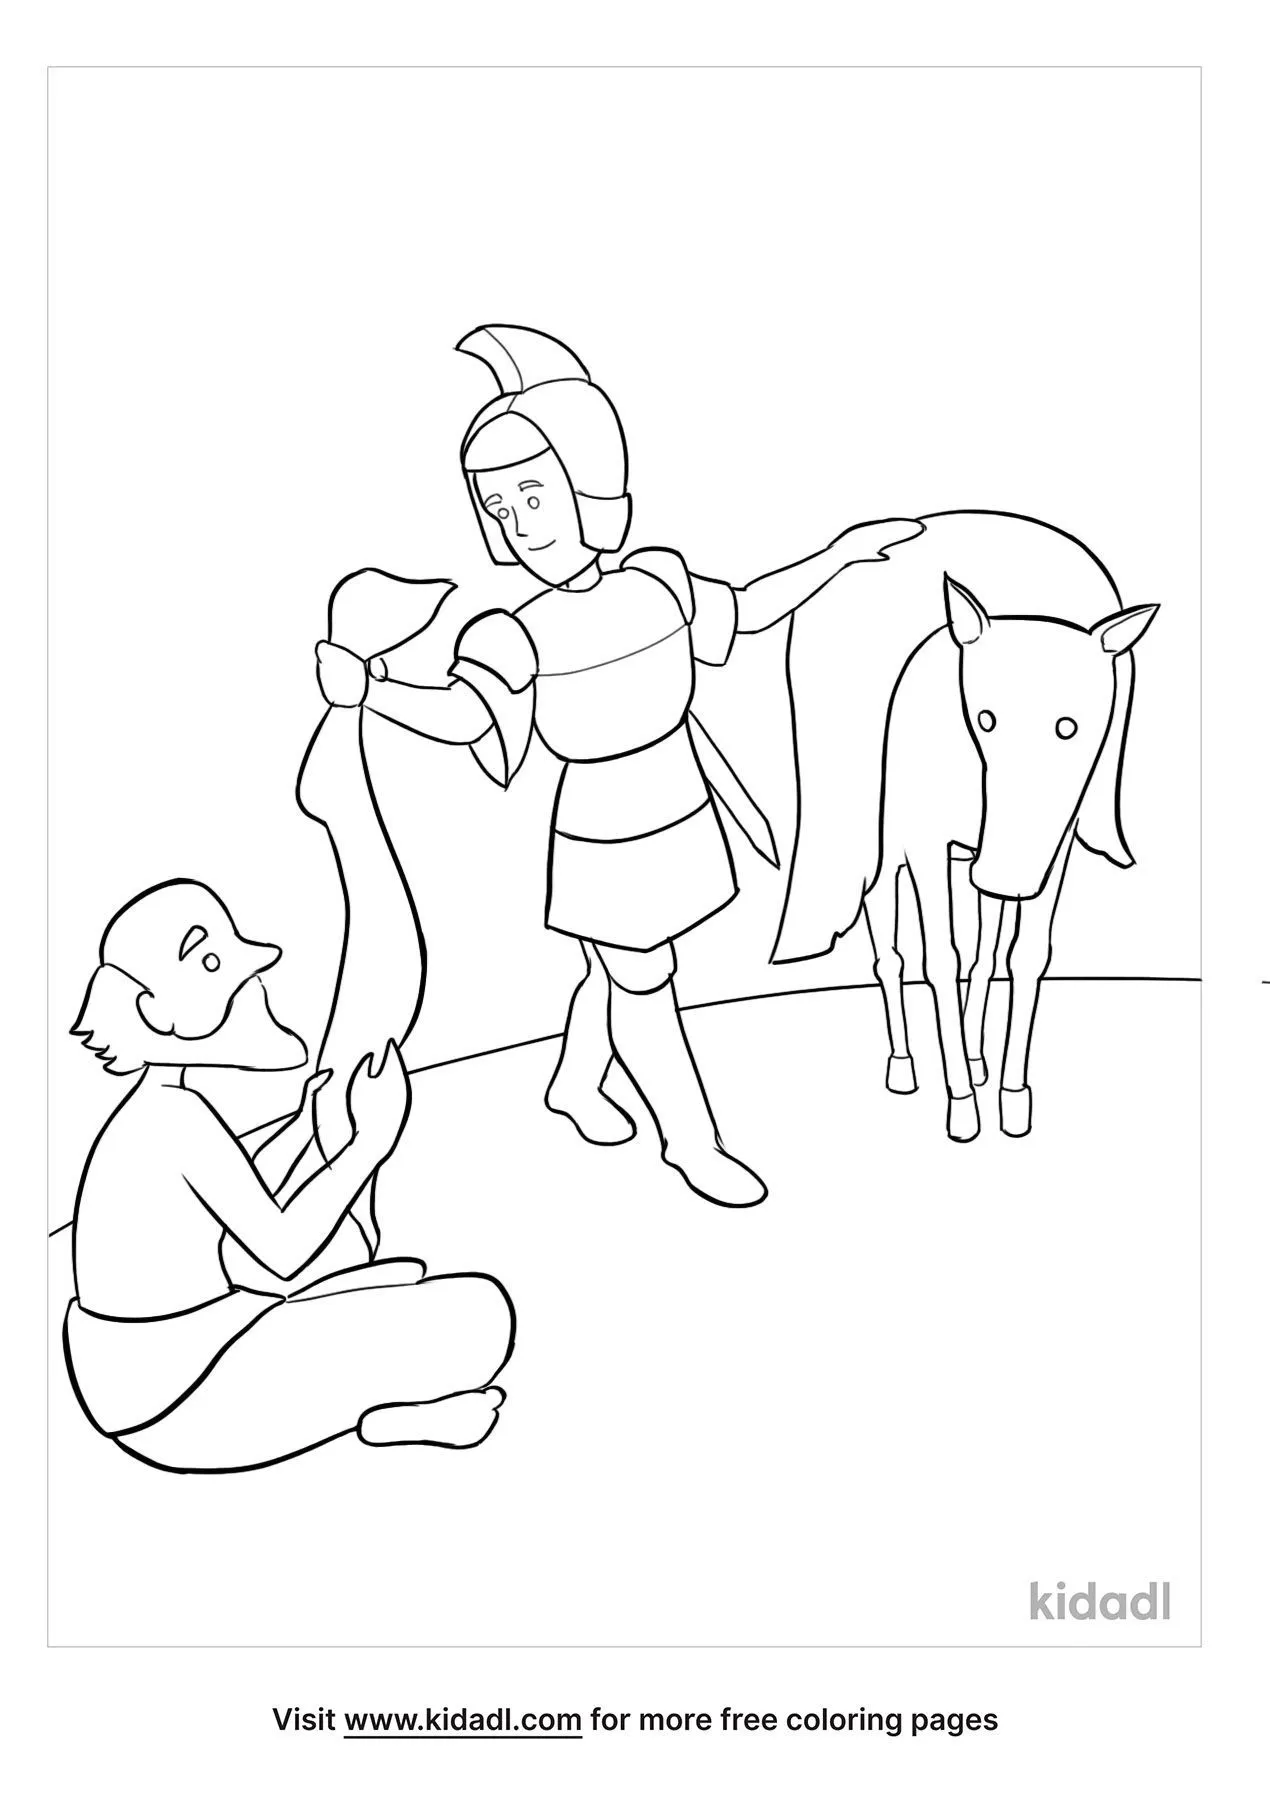 Free st martin of tours coloring page coloring page printables